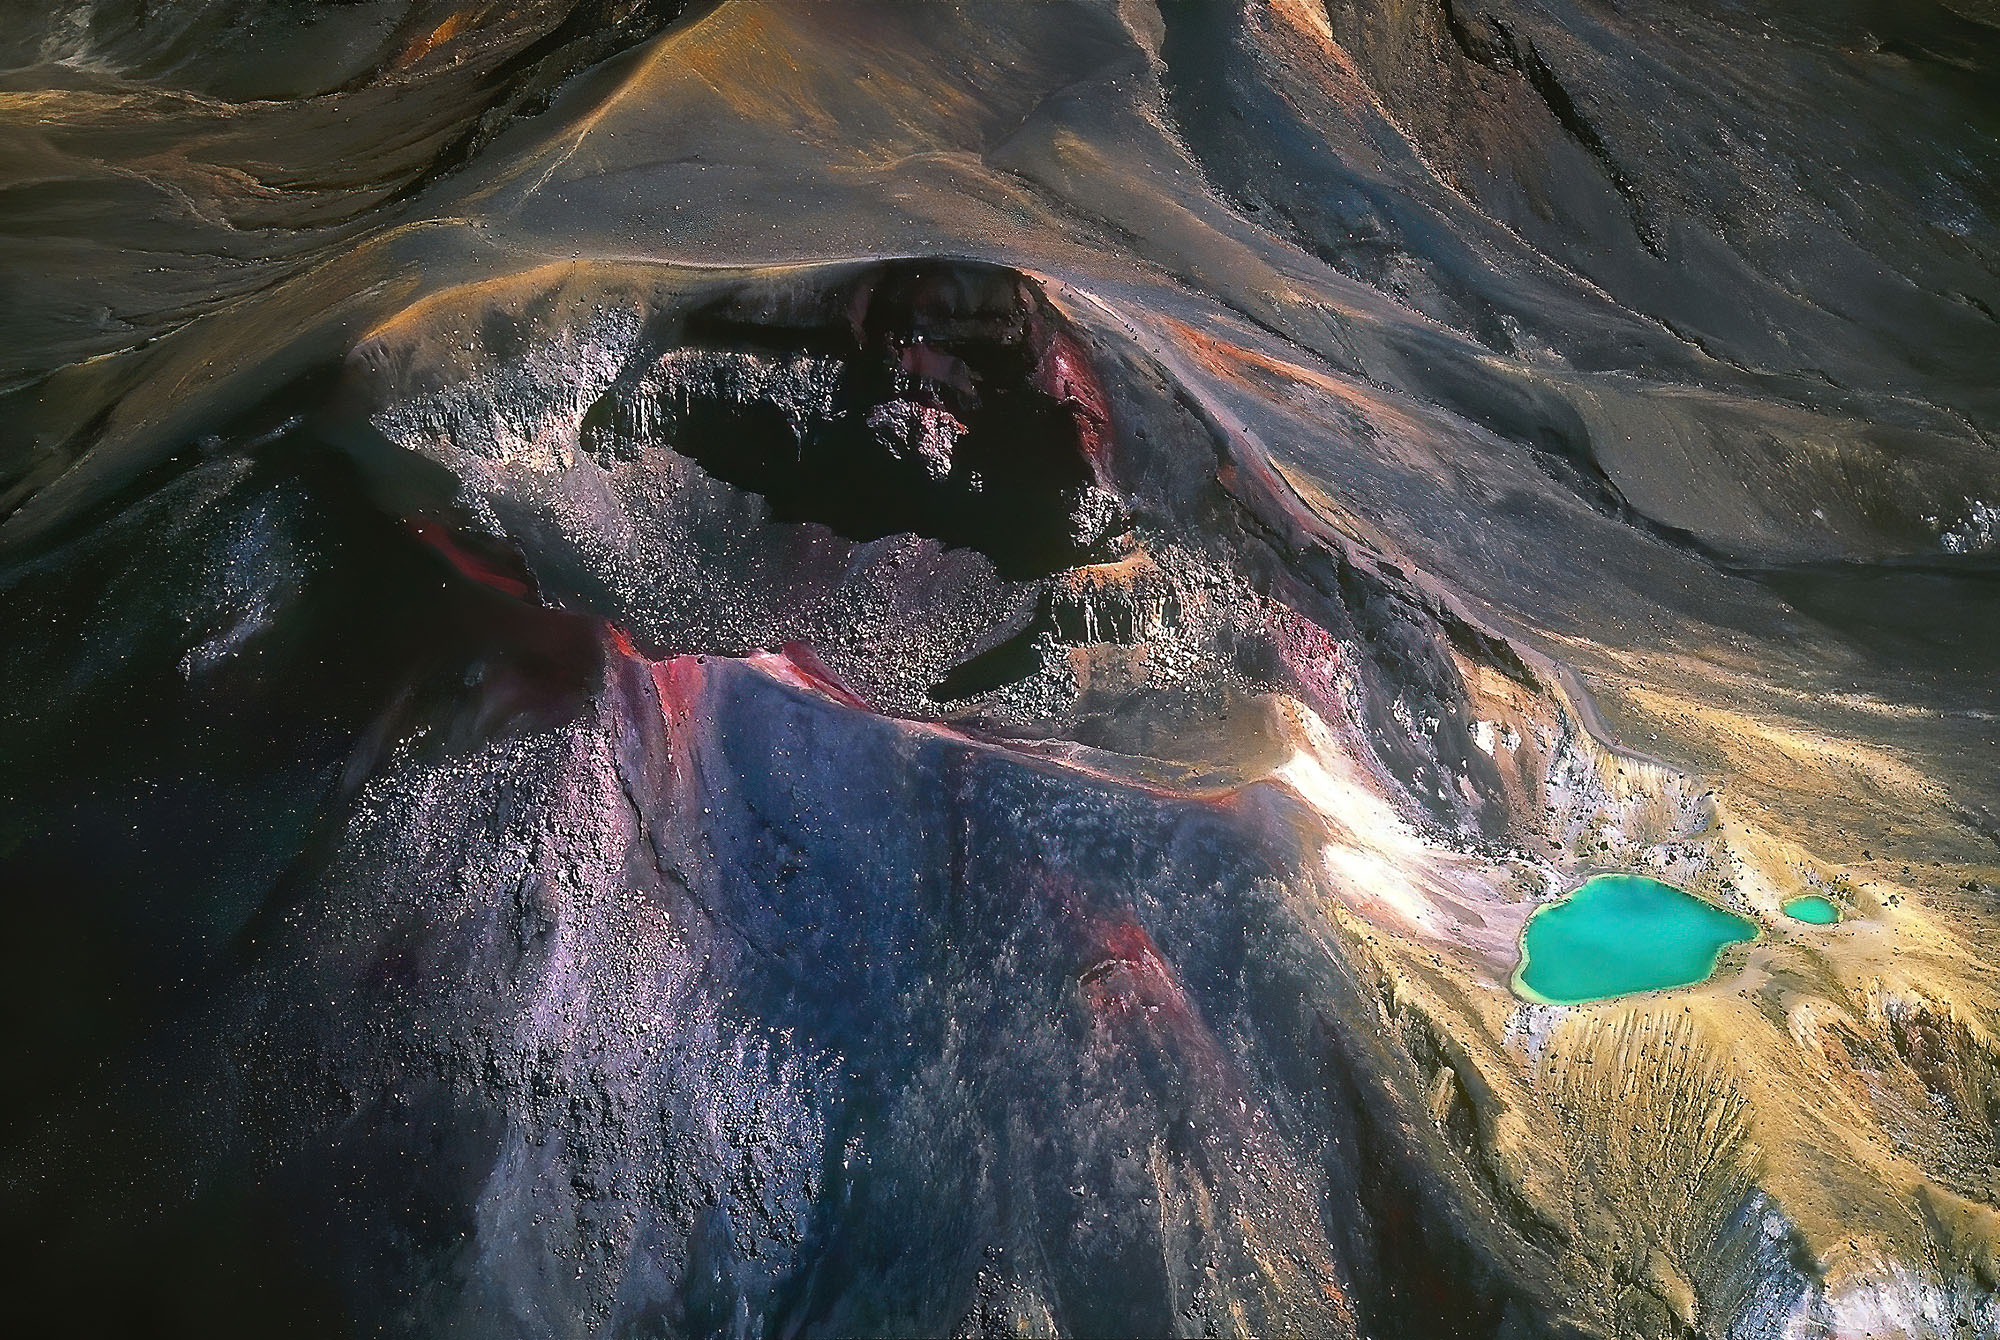 The aerial view into Red Crater with the green Emerald Lakes on the summit of Mount Tongariro in New Zealand reveal the extraordinary and ever-changing beauty of explosive volcanism.